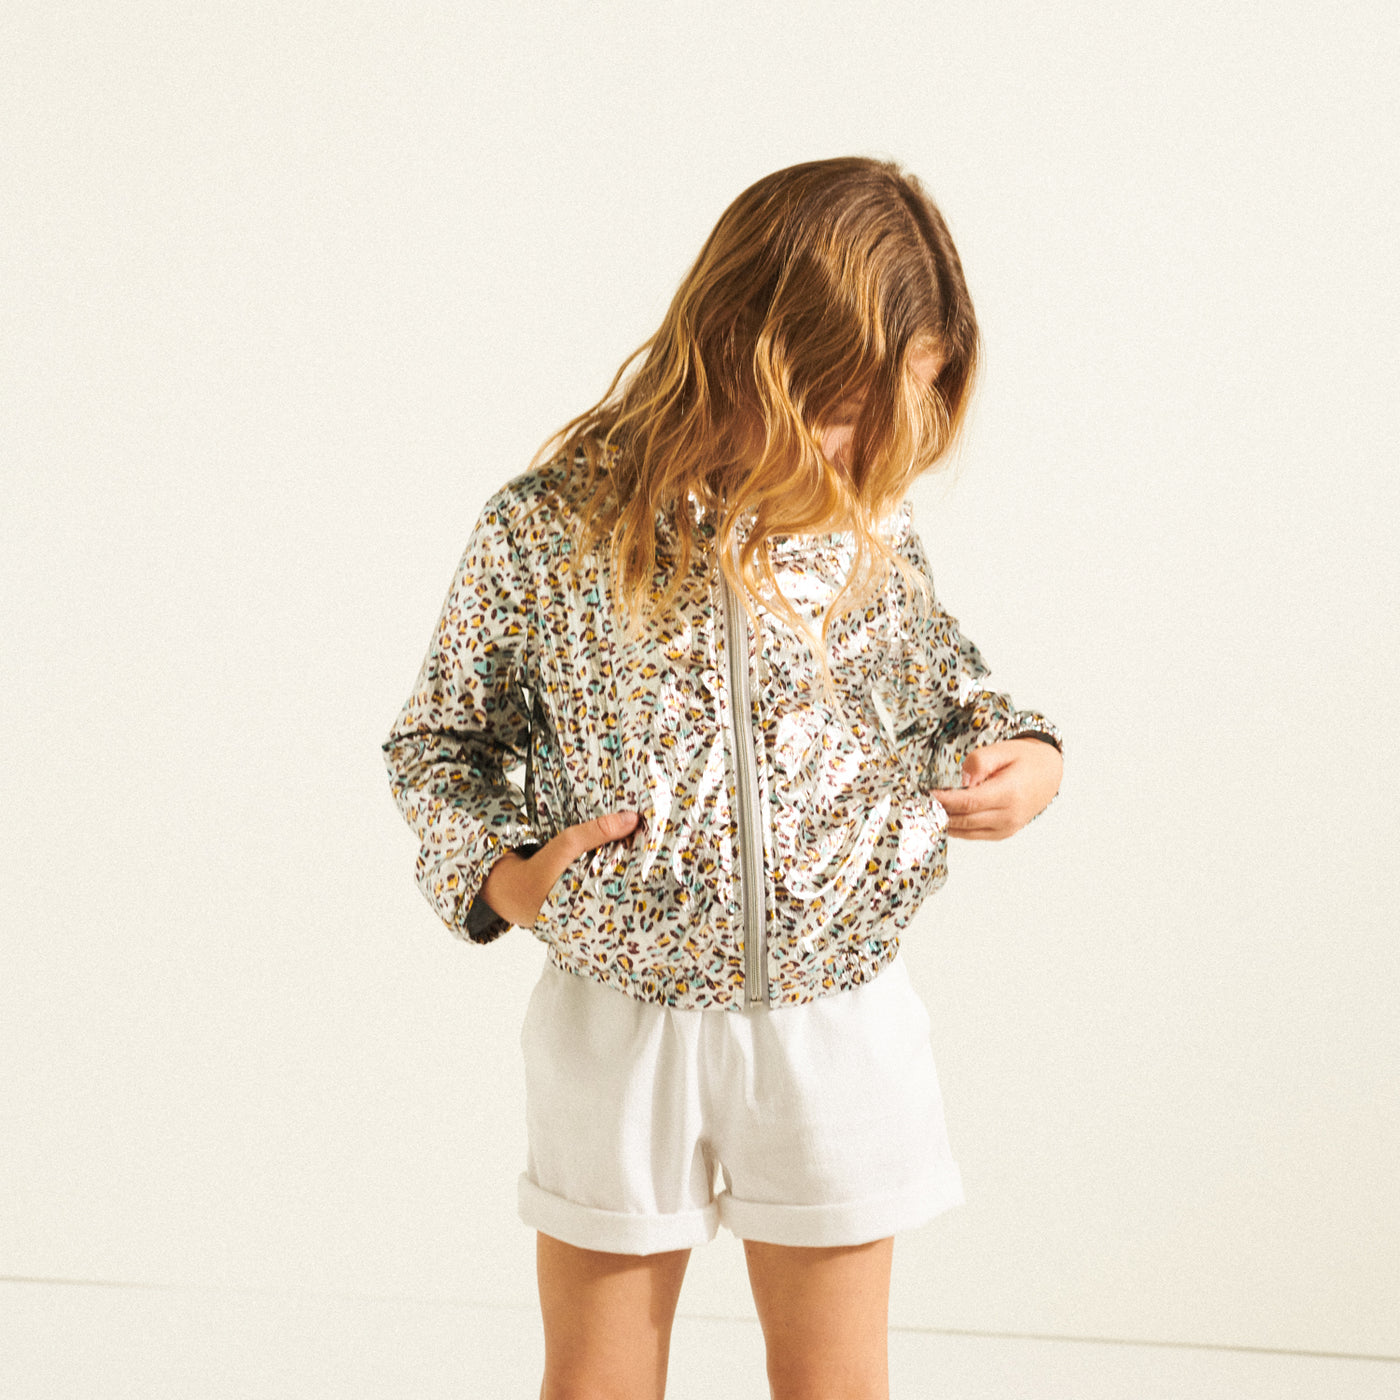 Girl in shiny cheetah print jacket from Bonpoint Spring Summer 2022 Collection